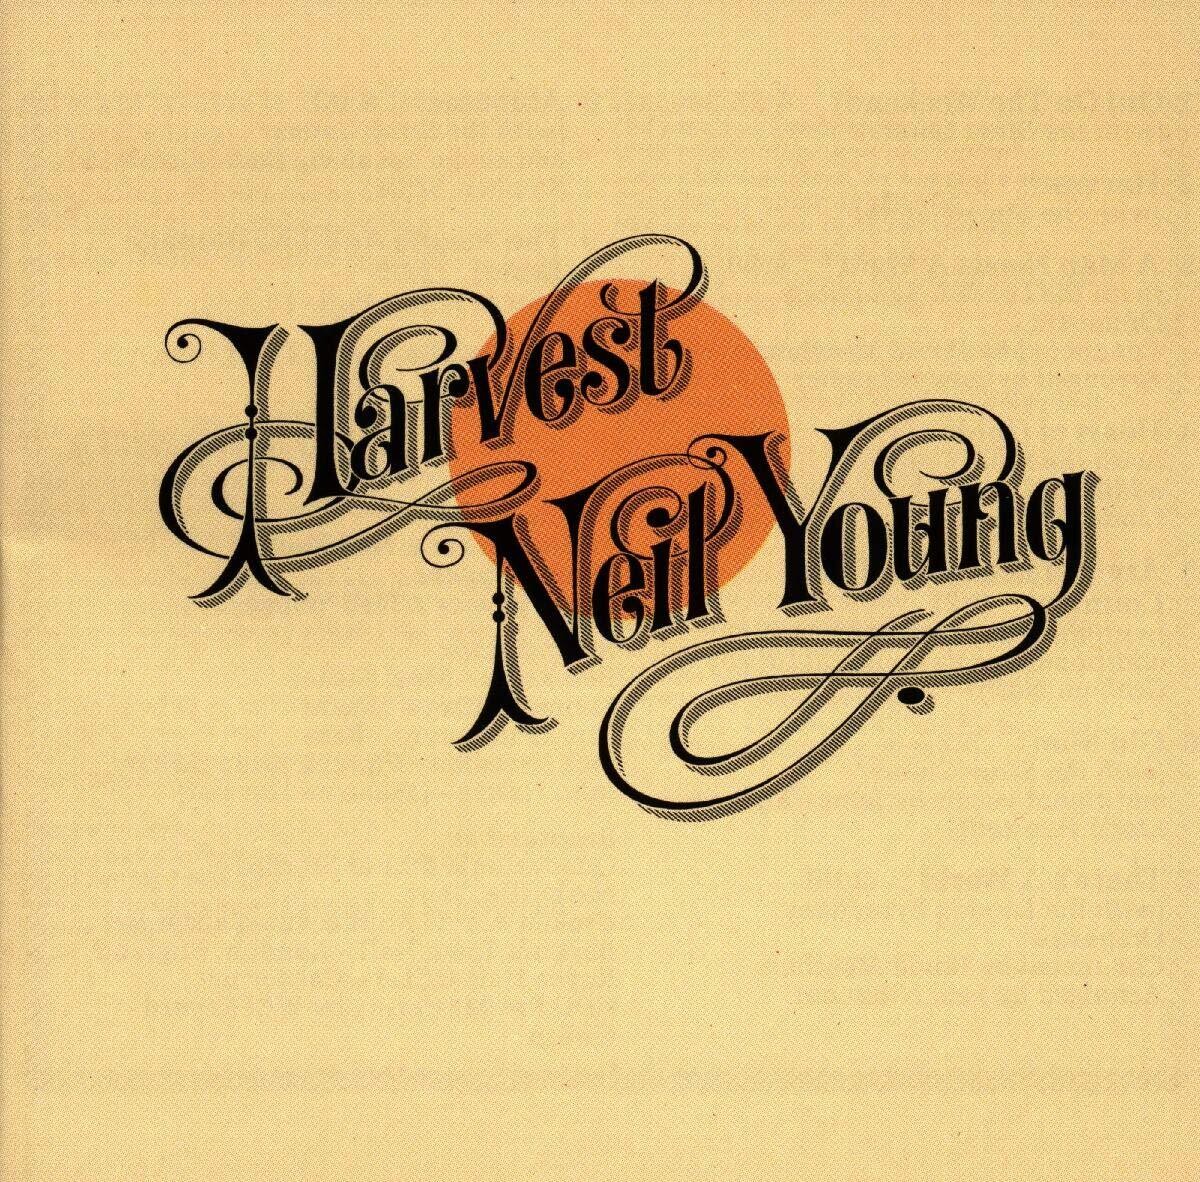 Neil Young "Harvest"